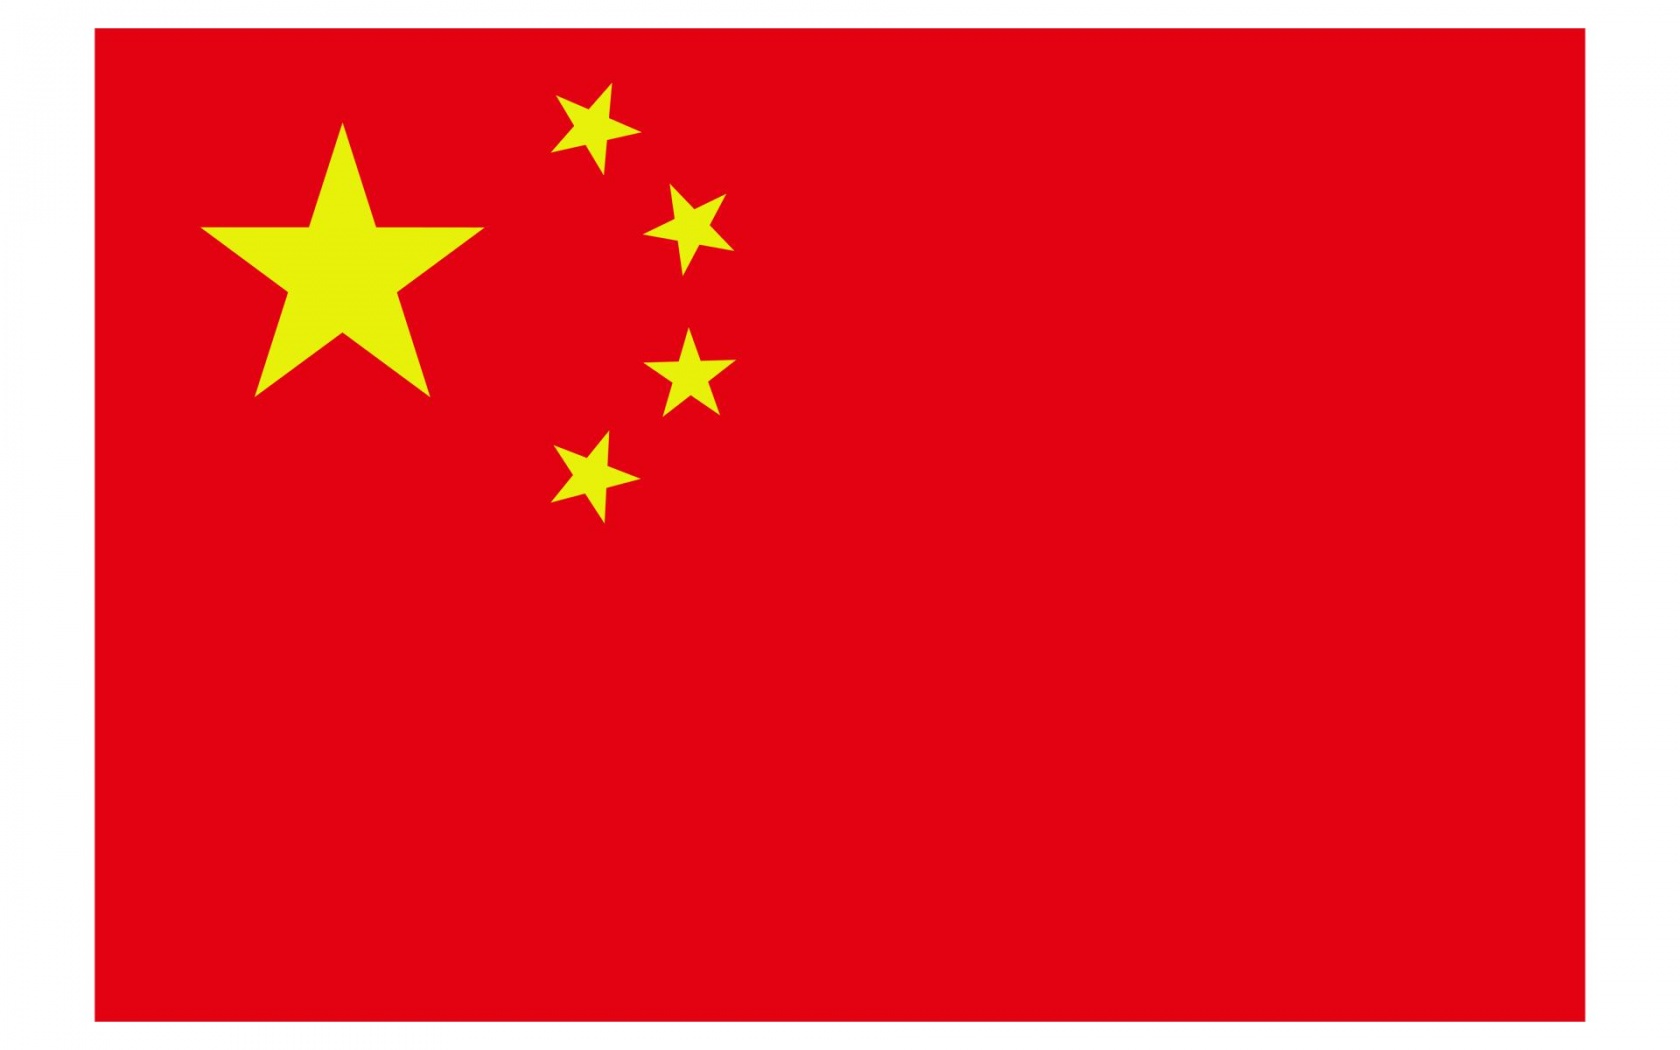 Picture Of China Flag   ClipArt Best